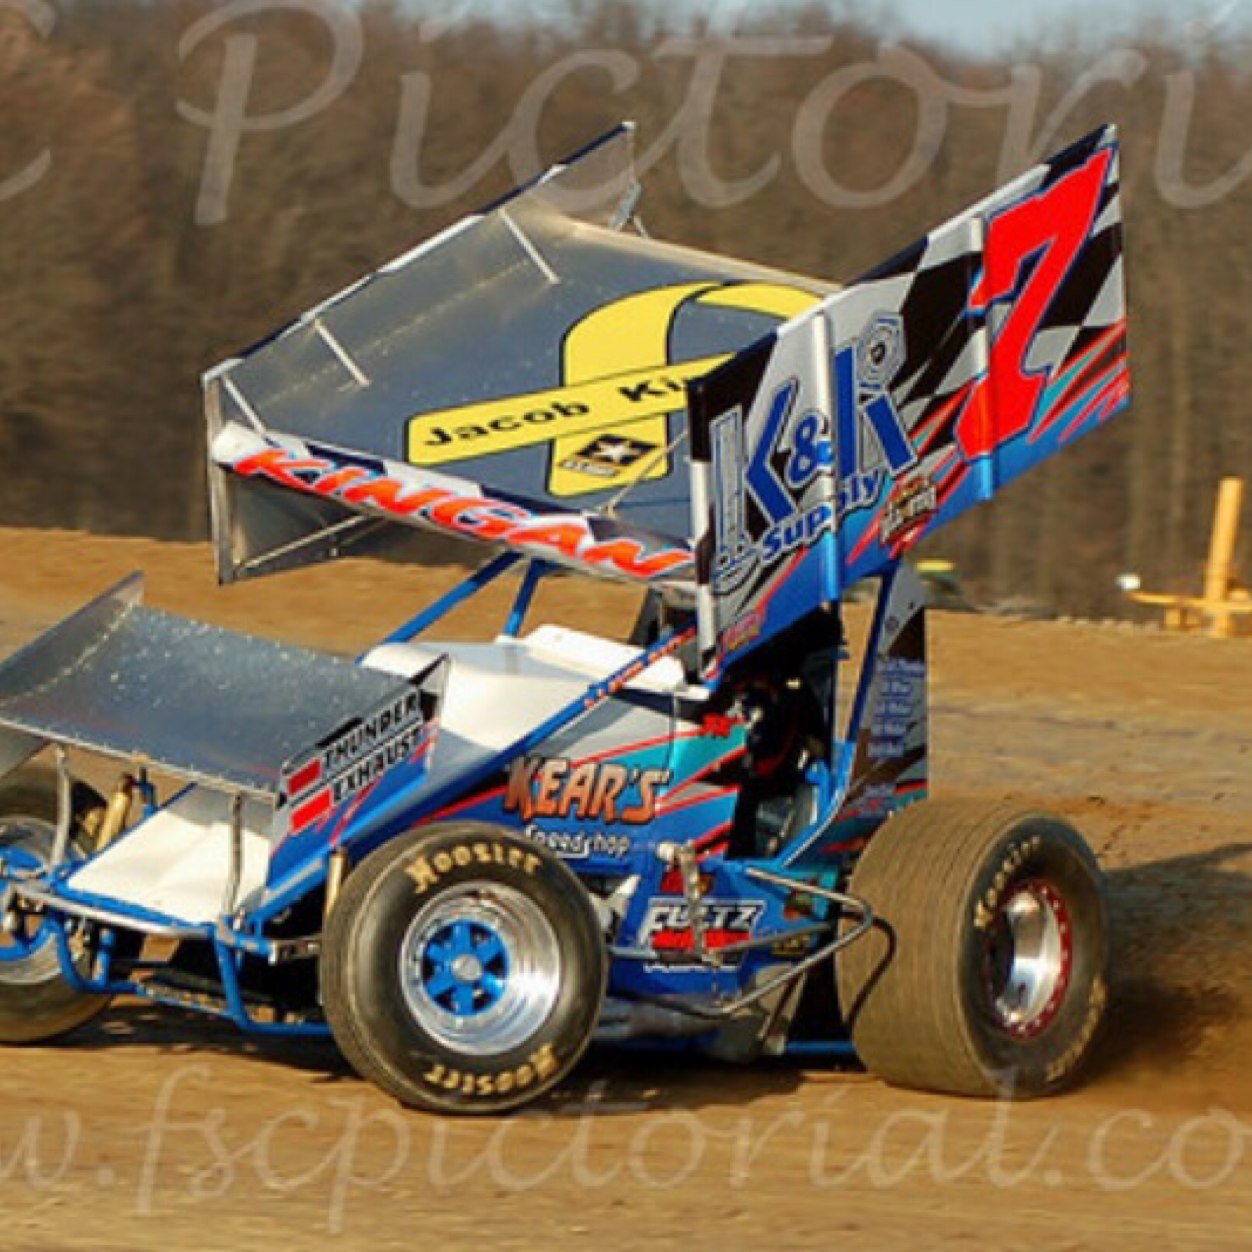 Husband, Father, and driver of a north central Ohio based 410 sprint car